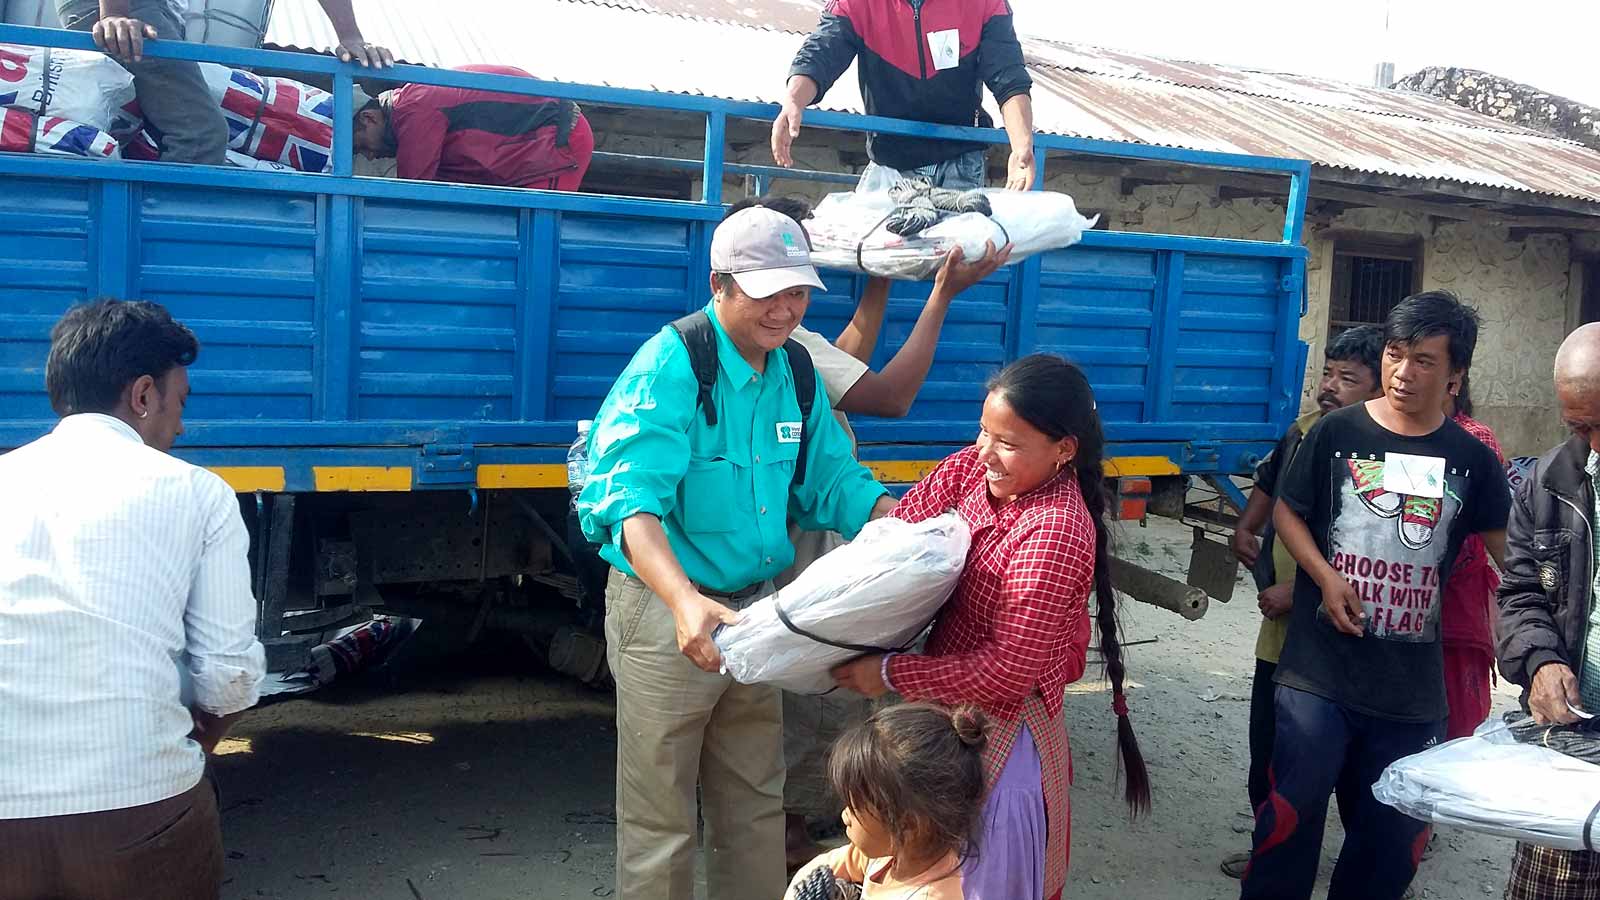 Excited families rush to World Concern distribution points, grateful for your help when they needed it the most.